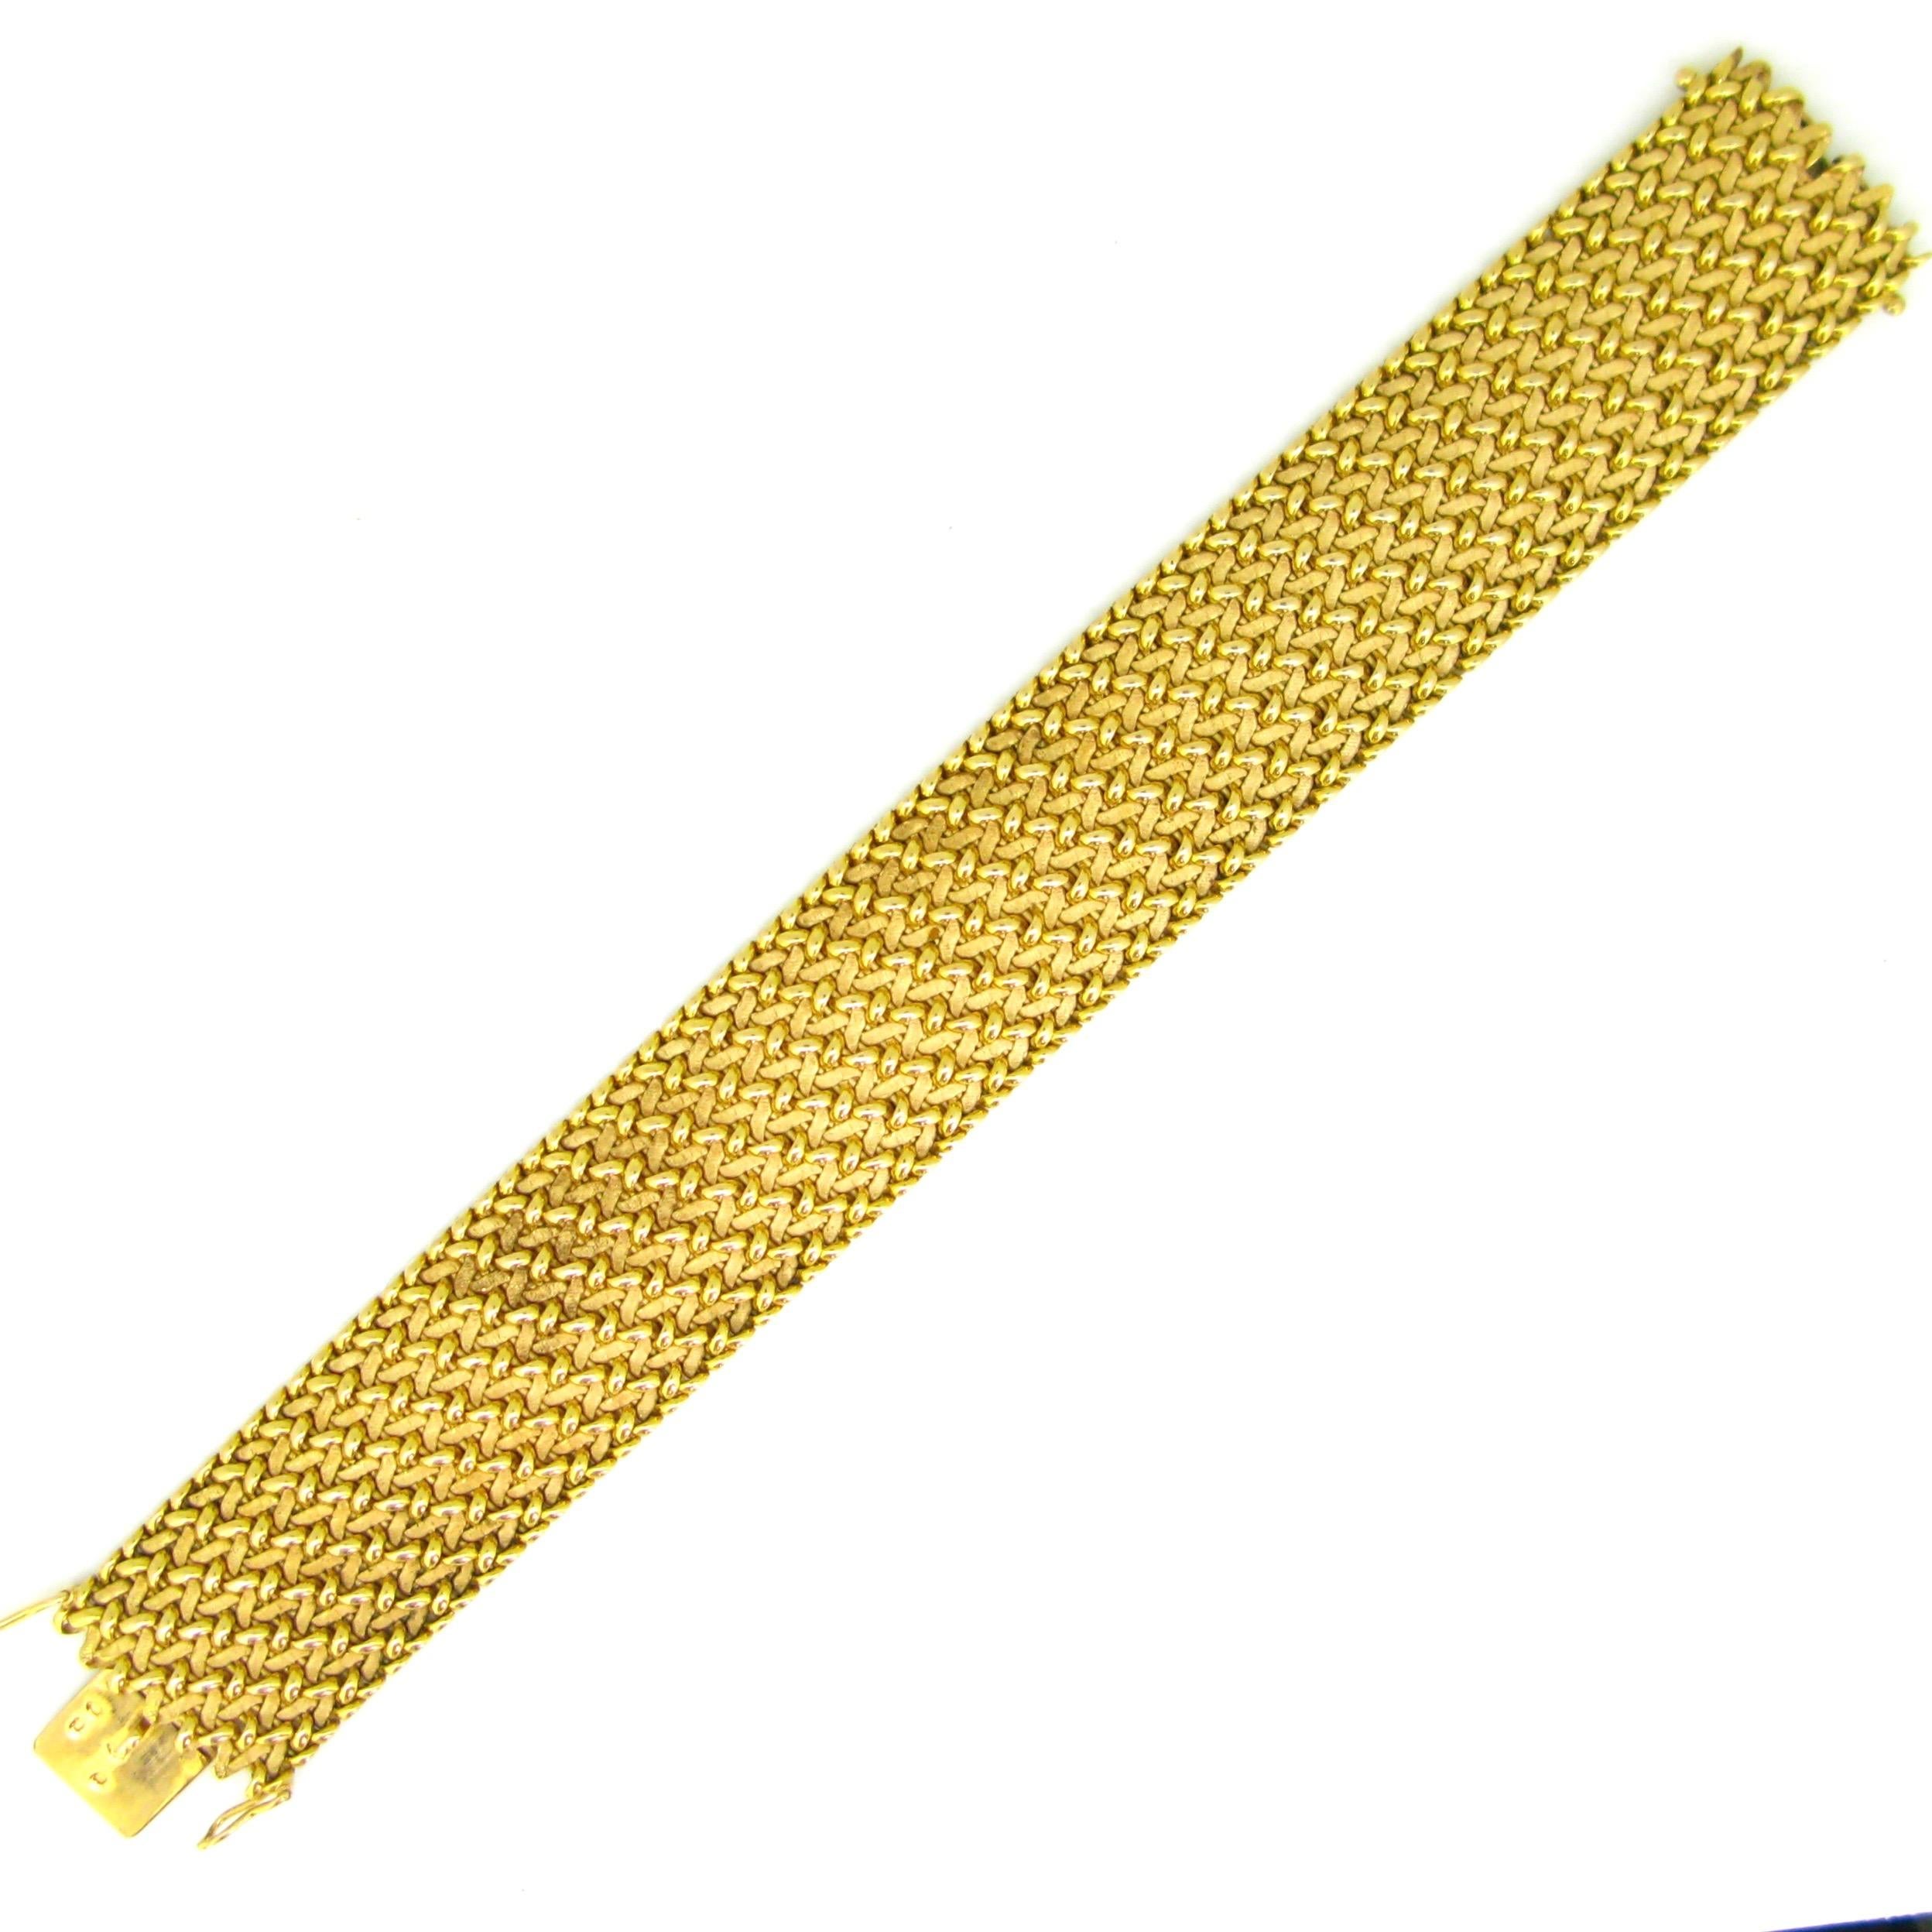 Woven Mesh Large Textured Yellow Gold Cuff Bracelet 1